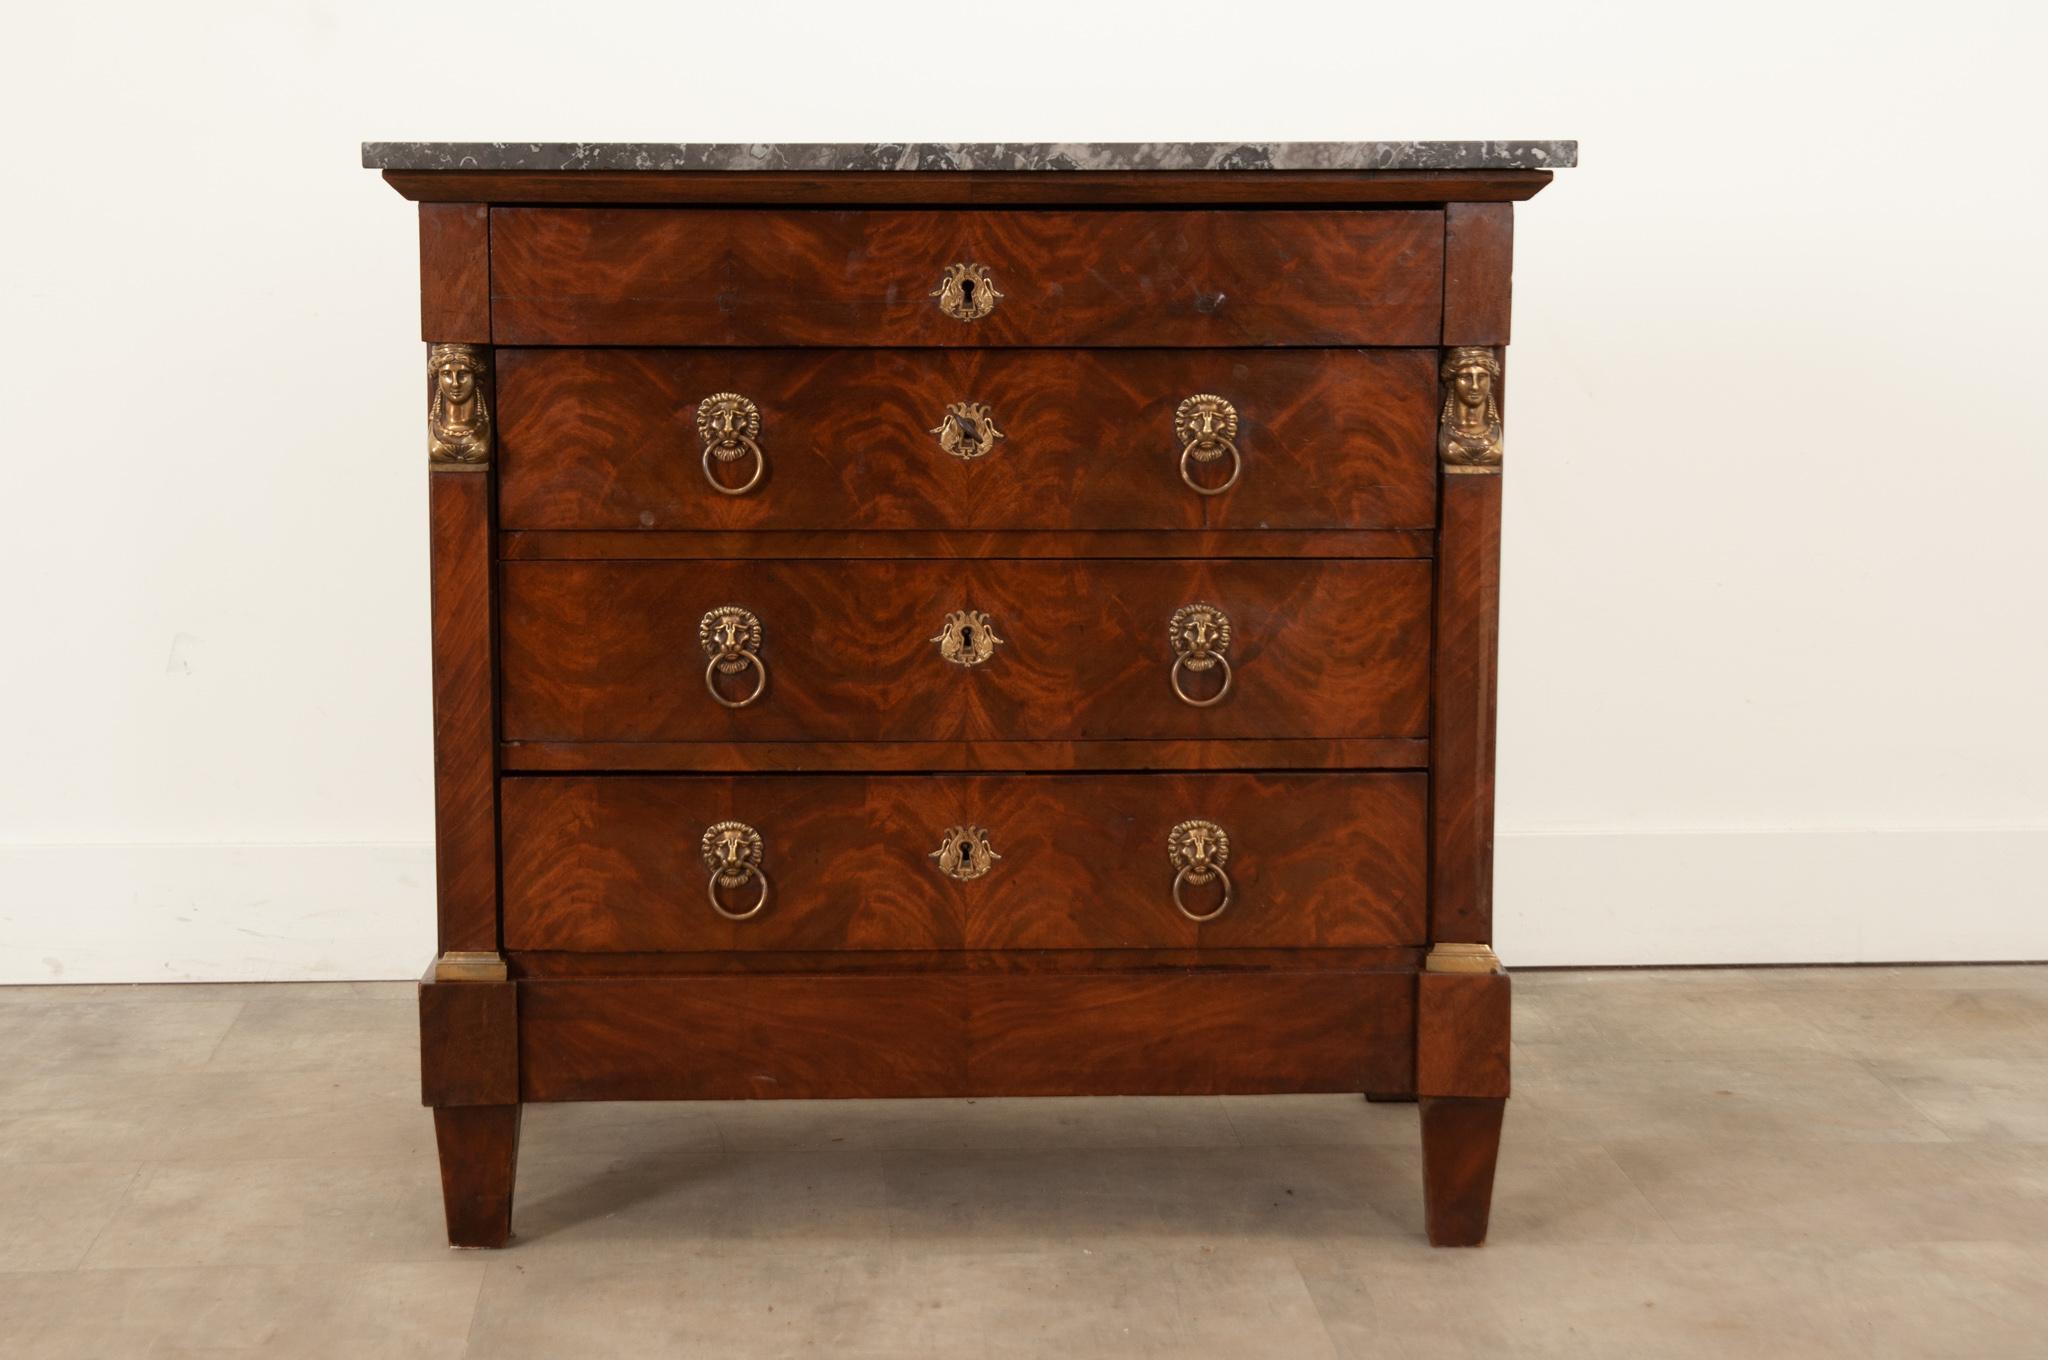 Four drawers and neoclassical details compose this outstanding Empirical commode hand-crafted in France circa 1810. This case piece is topped with an interesting piece of black, gray and white fossil marble that, along with the body, has patinated